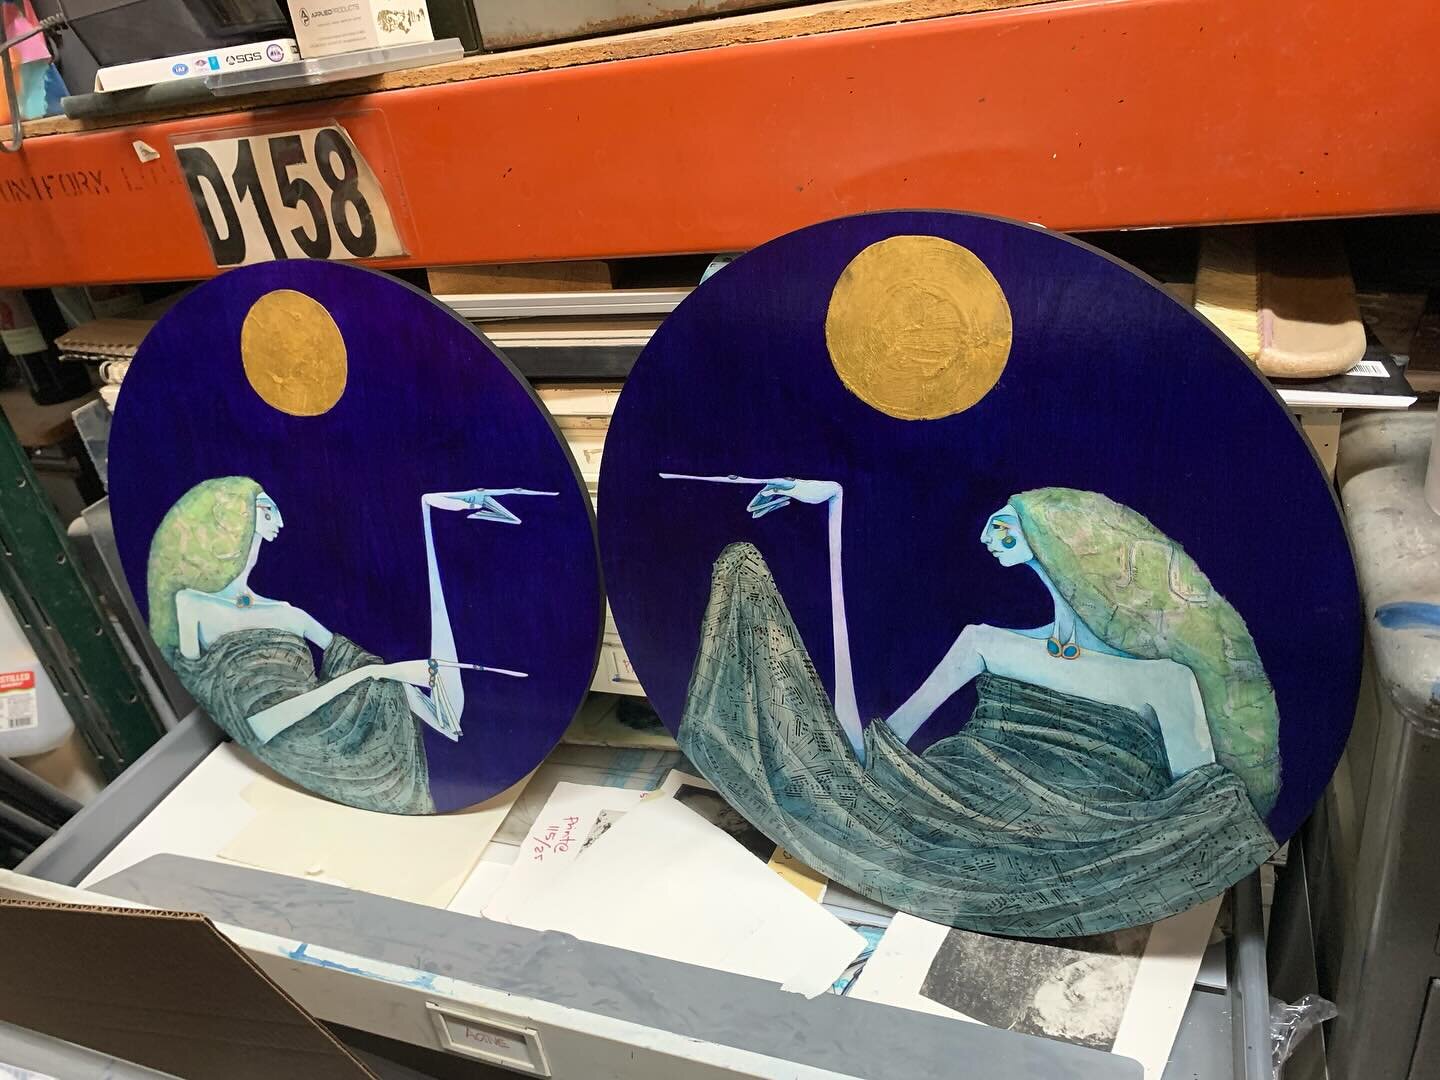 Made a pair of circles! I&rsquo;ll get a better pic next week but I&rsquo;m thinking they should be a set. I&rsquo;ve had other pairings I&rsquo;ve hoped would stay together but didn&rsquo;t. What do you think?
#katemorgan #katemorganart #theekatemor